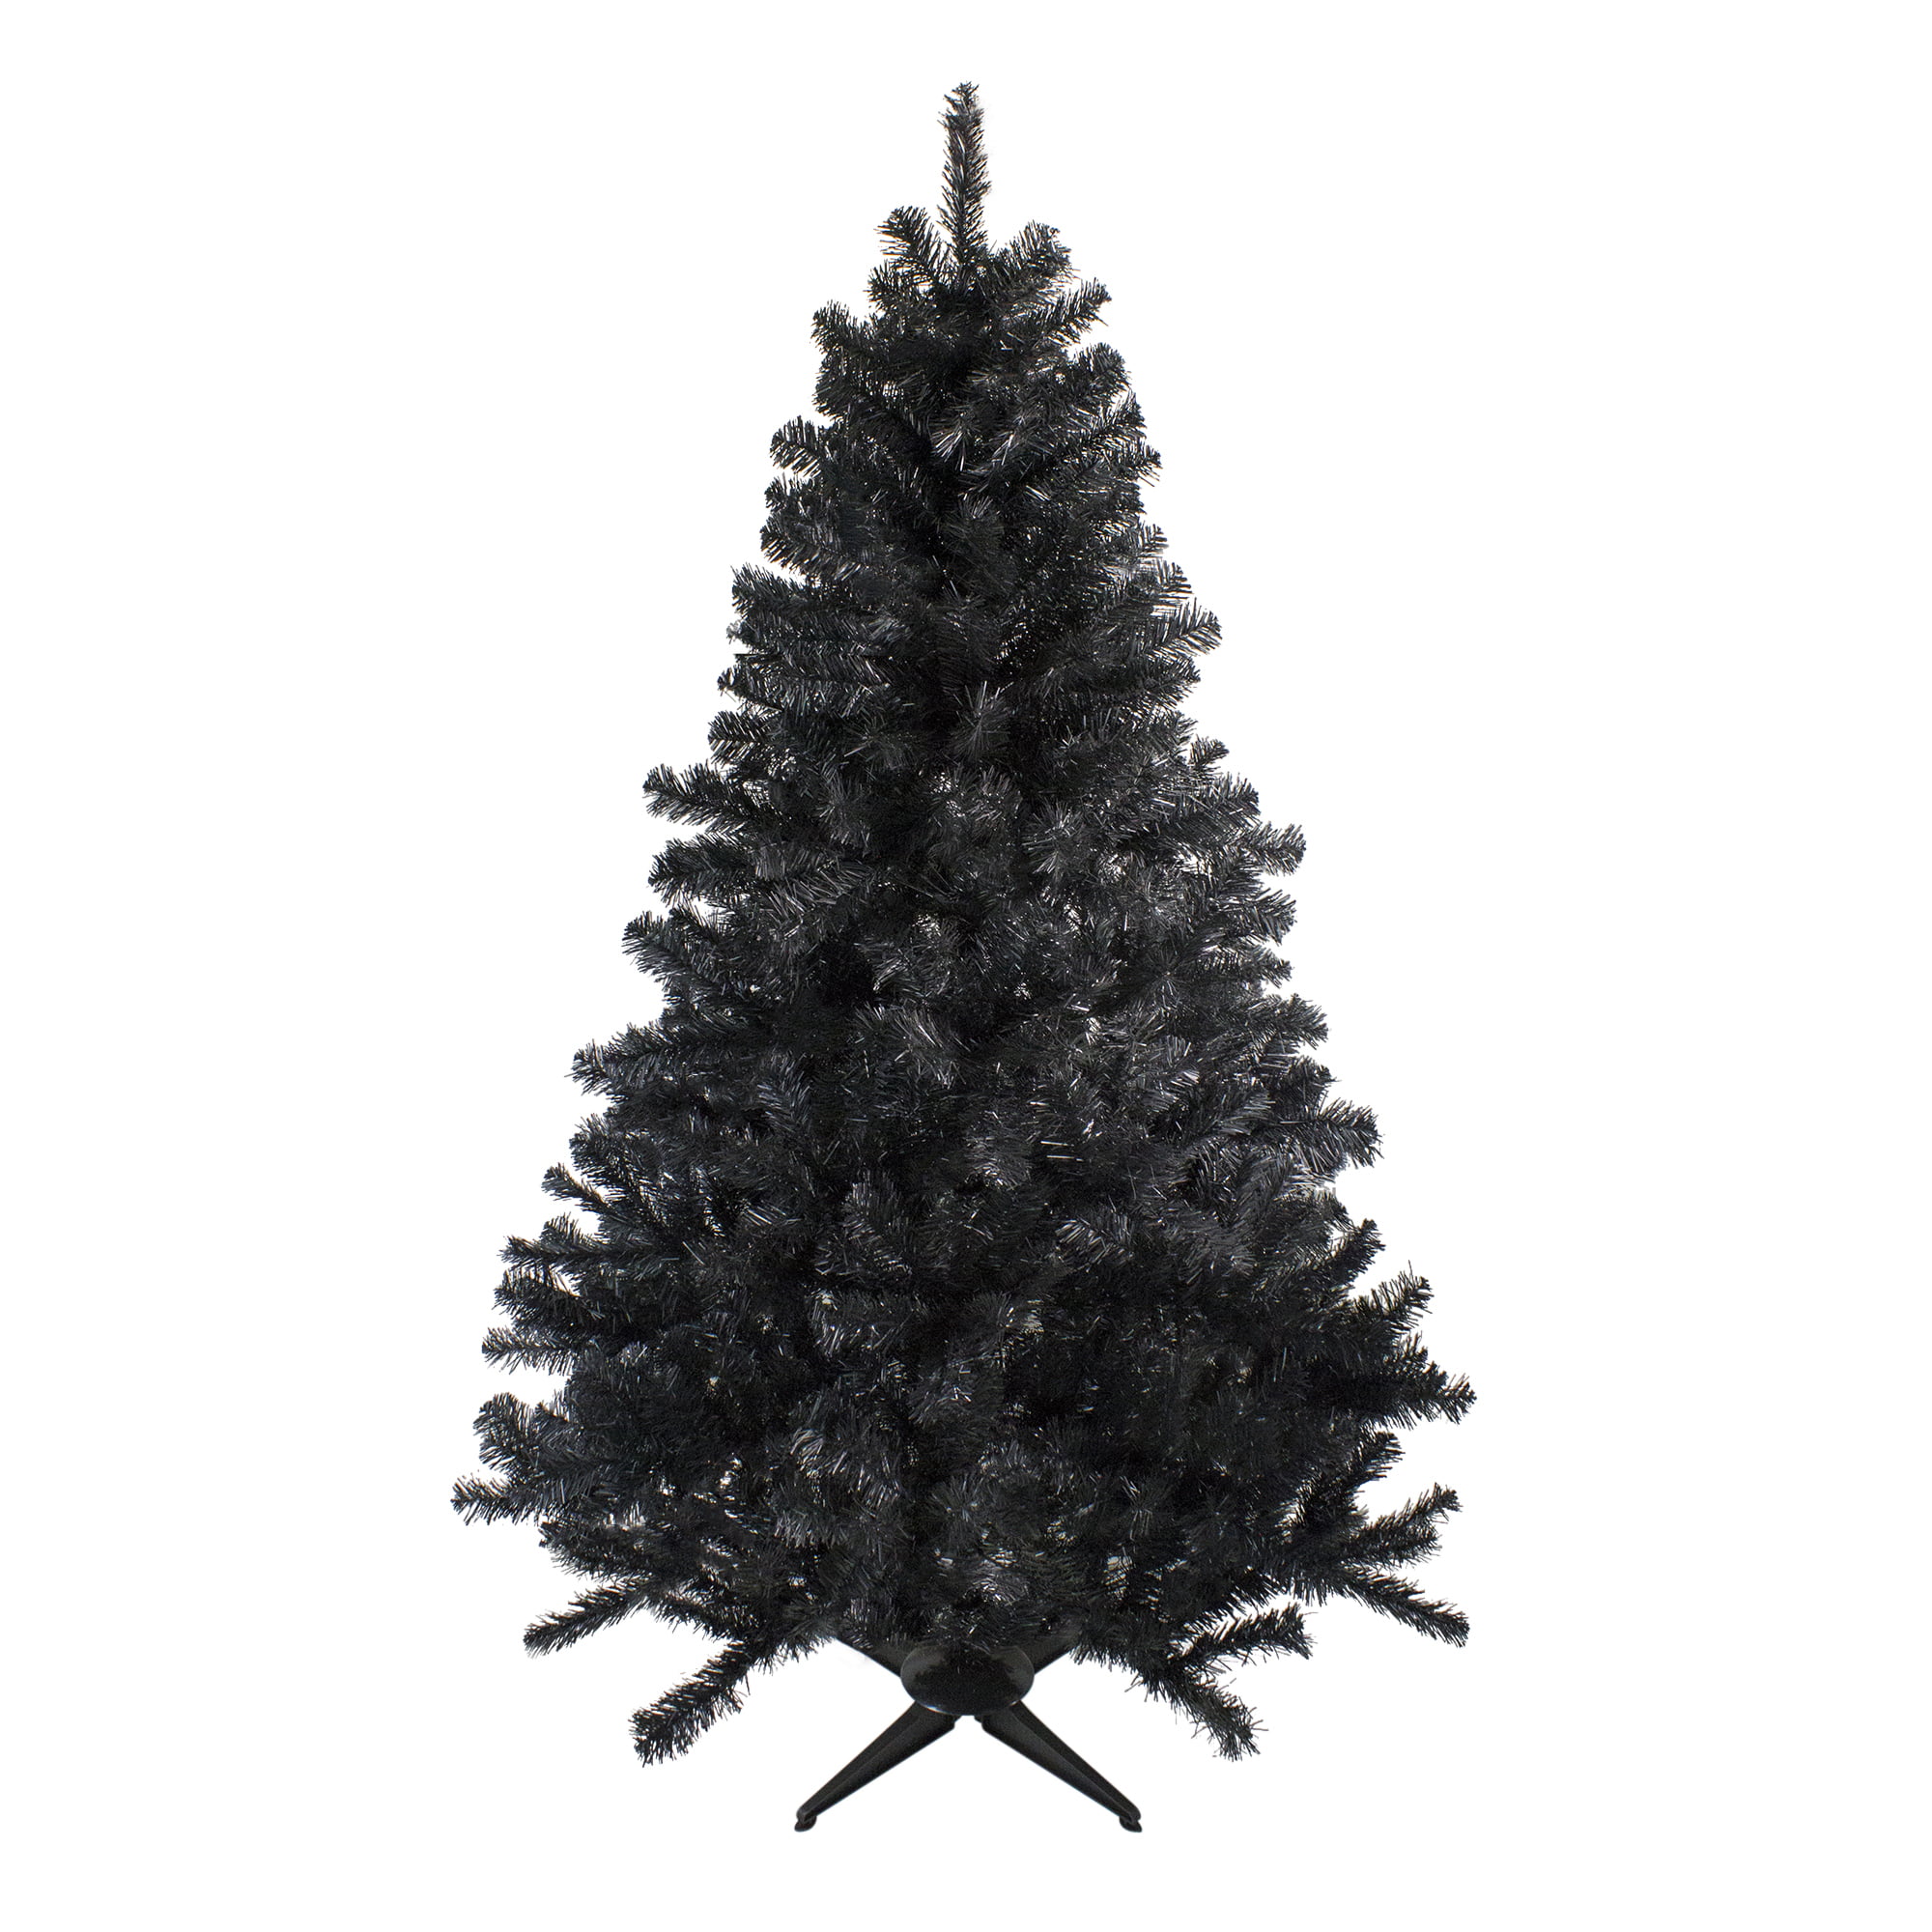 Details about   6ft Black Christmas Tree Imperial Tips  Artificial Tree with Metal Stand 